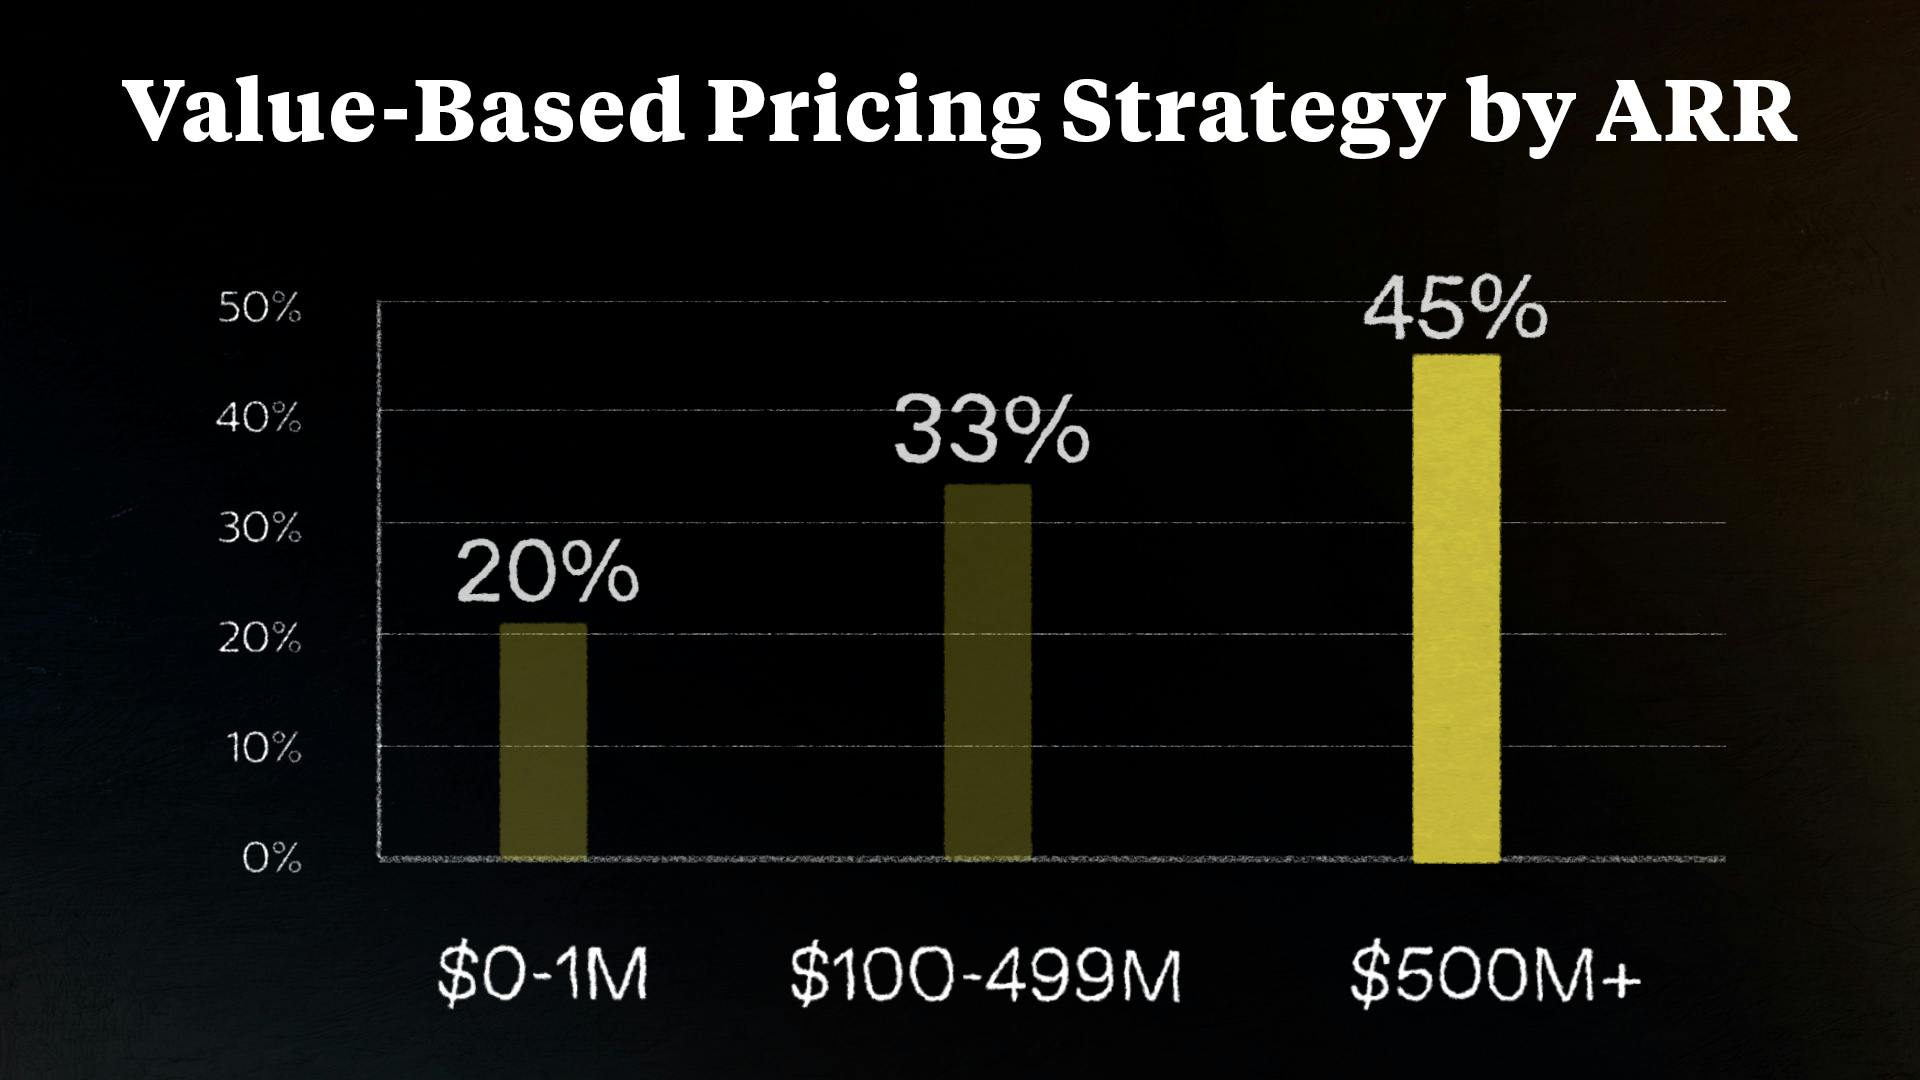 Value-Based Pricing Strategy by ARR